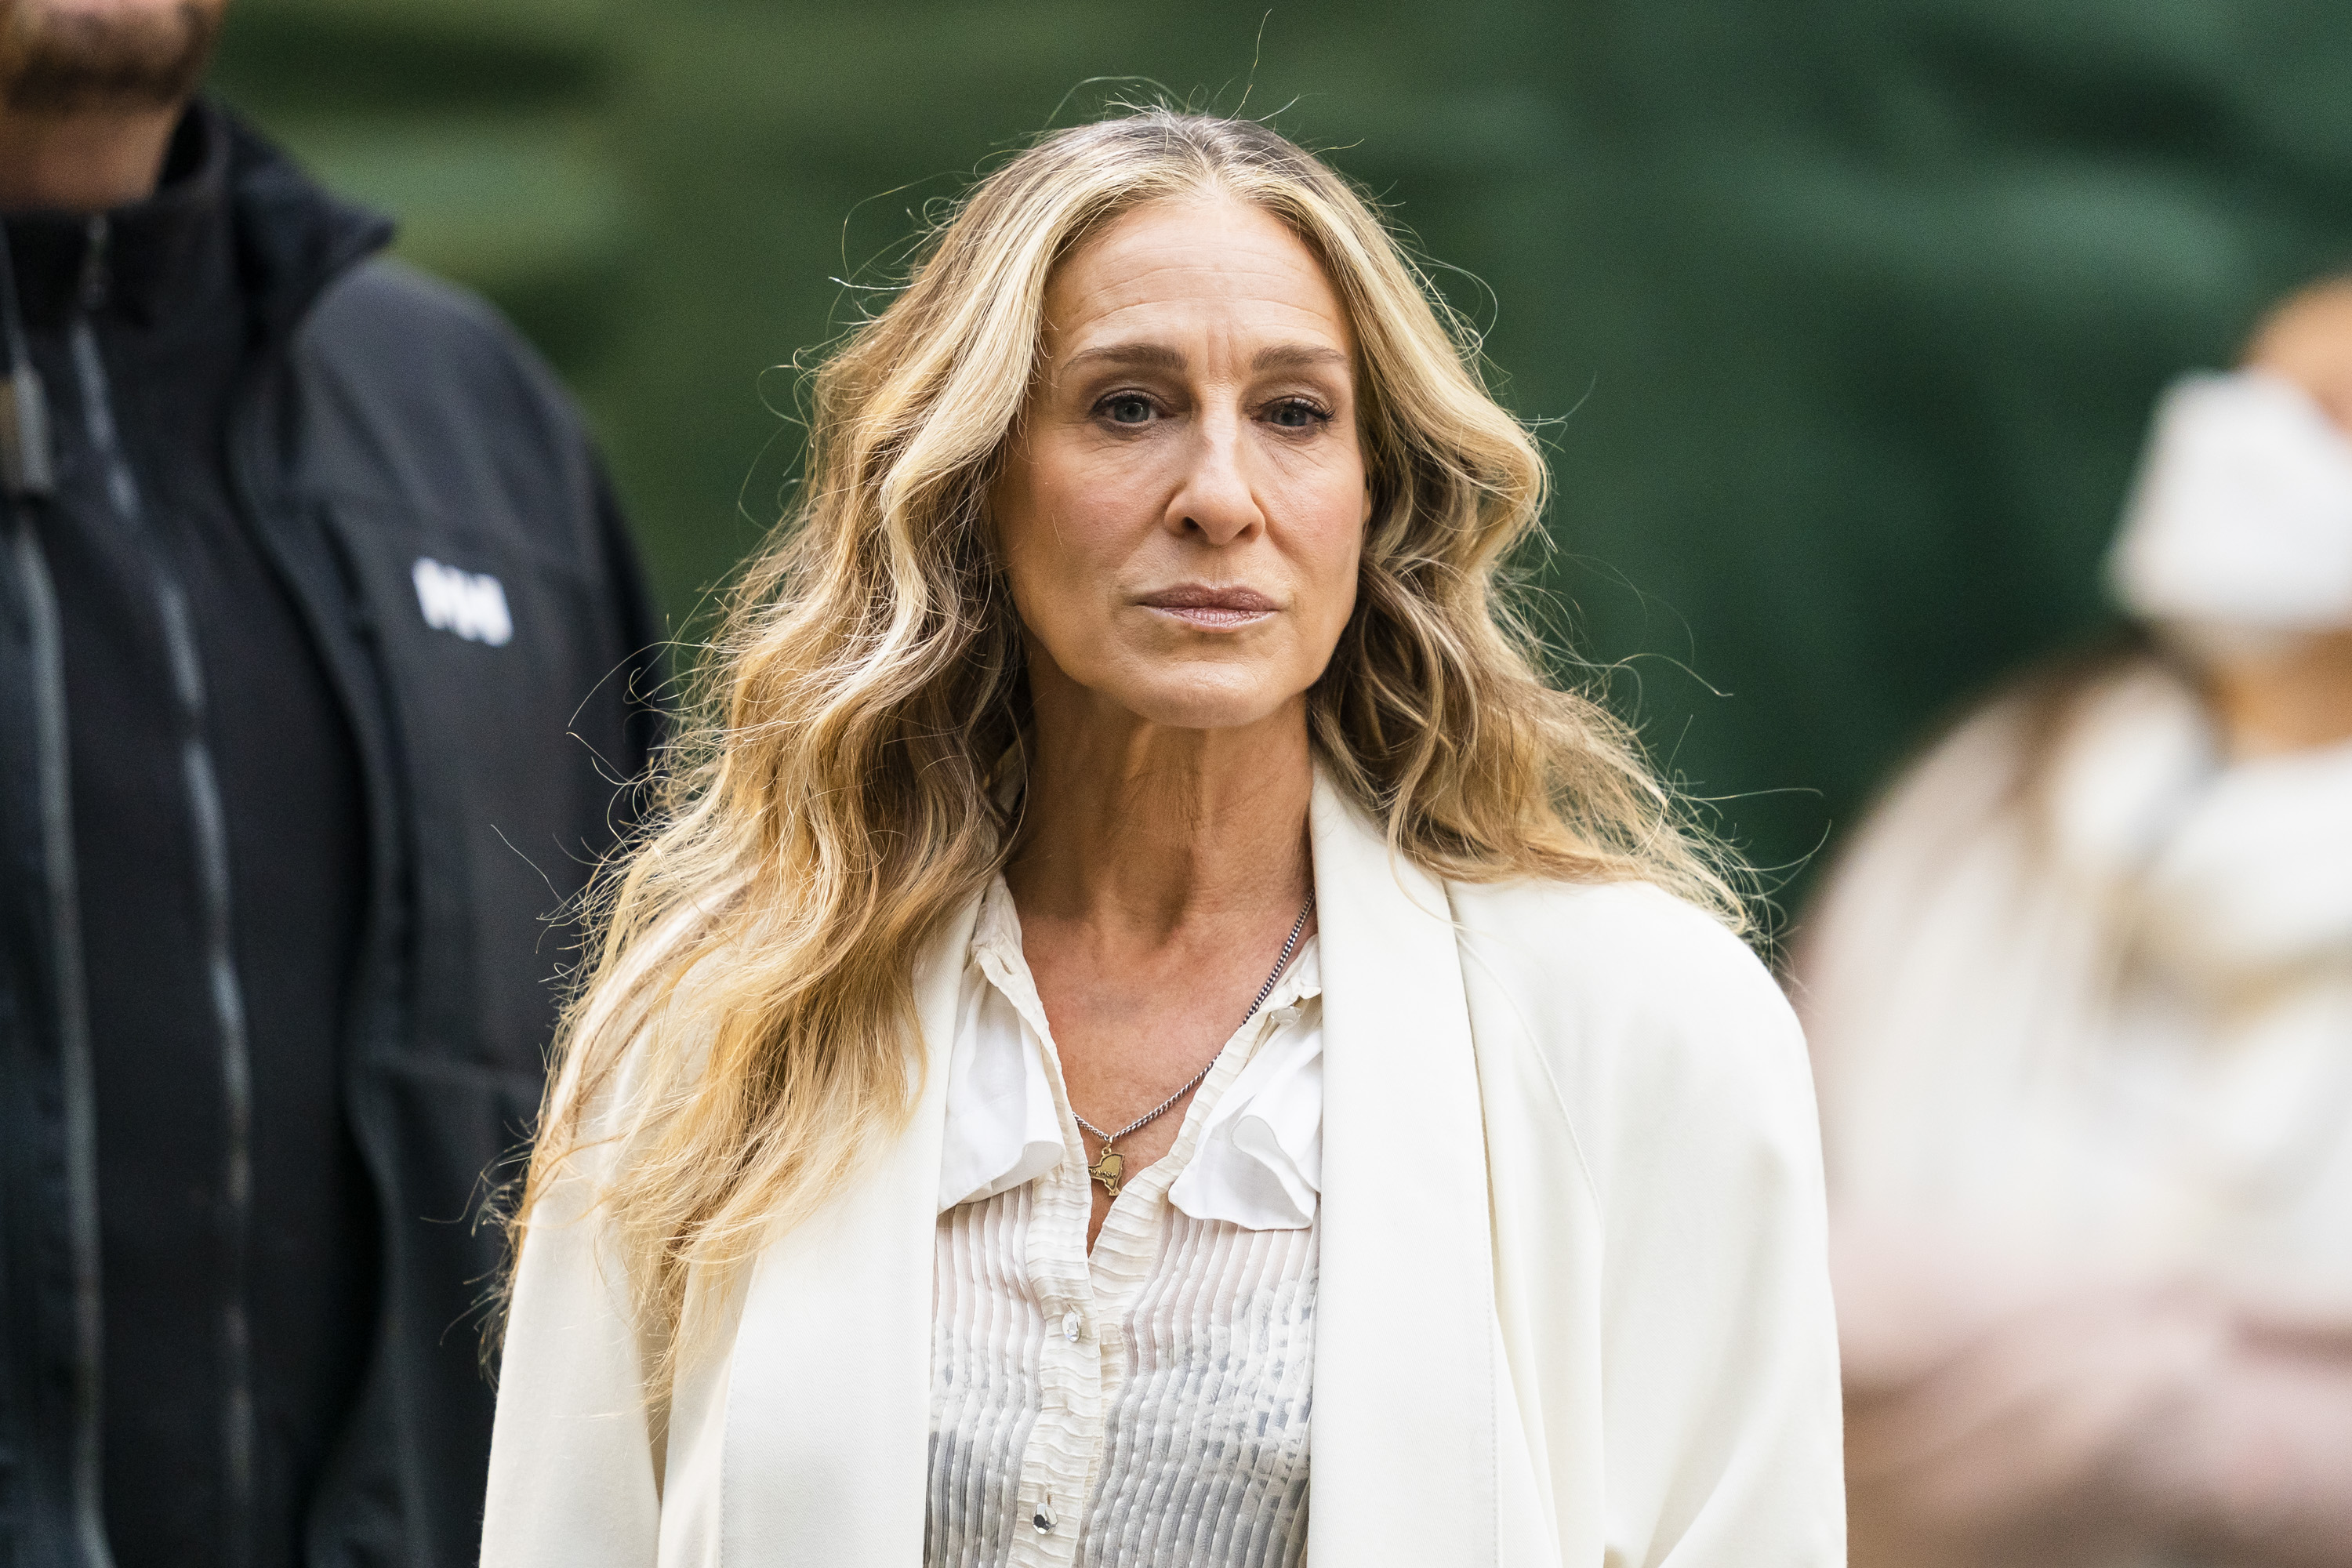 Sarah Jessica Parker seen filming "And Just Like That..." in Madison Square Park on November 7, 2021, in New York City | Source: Getty Images